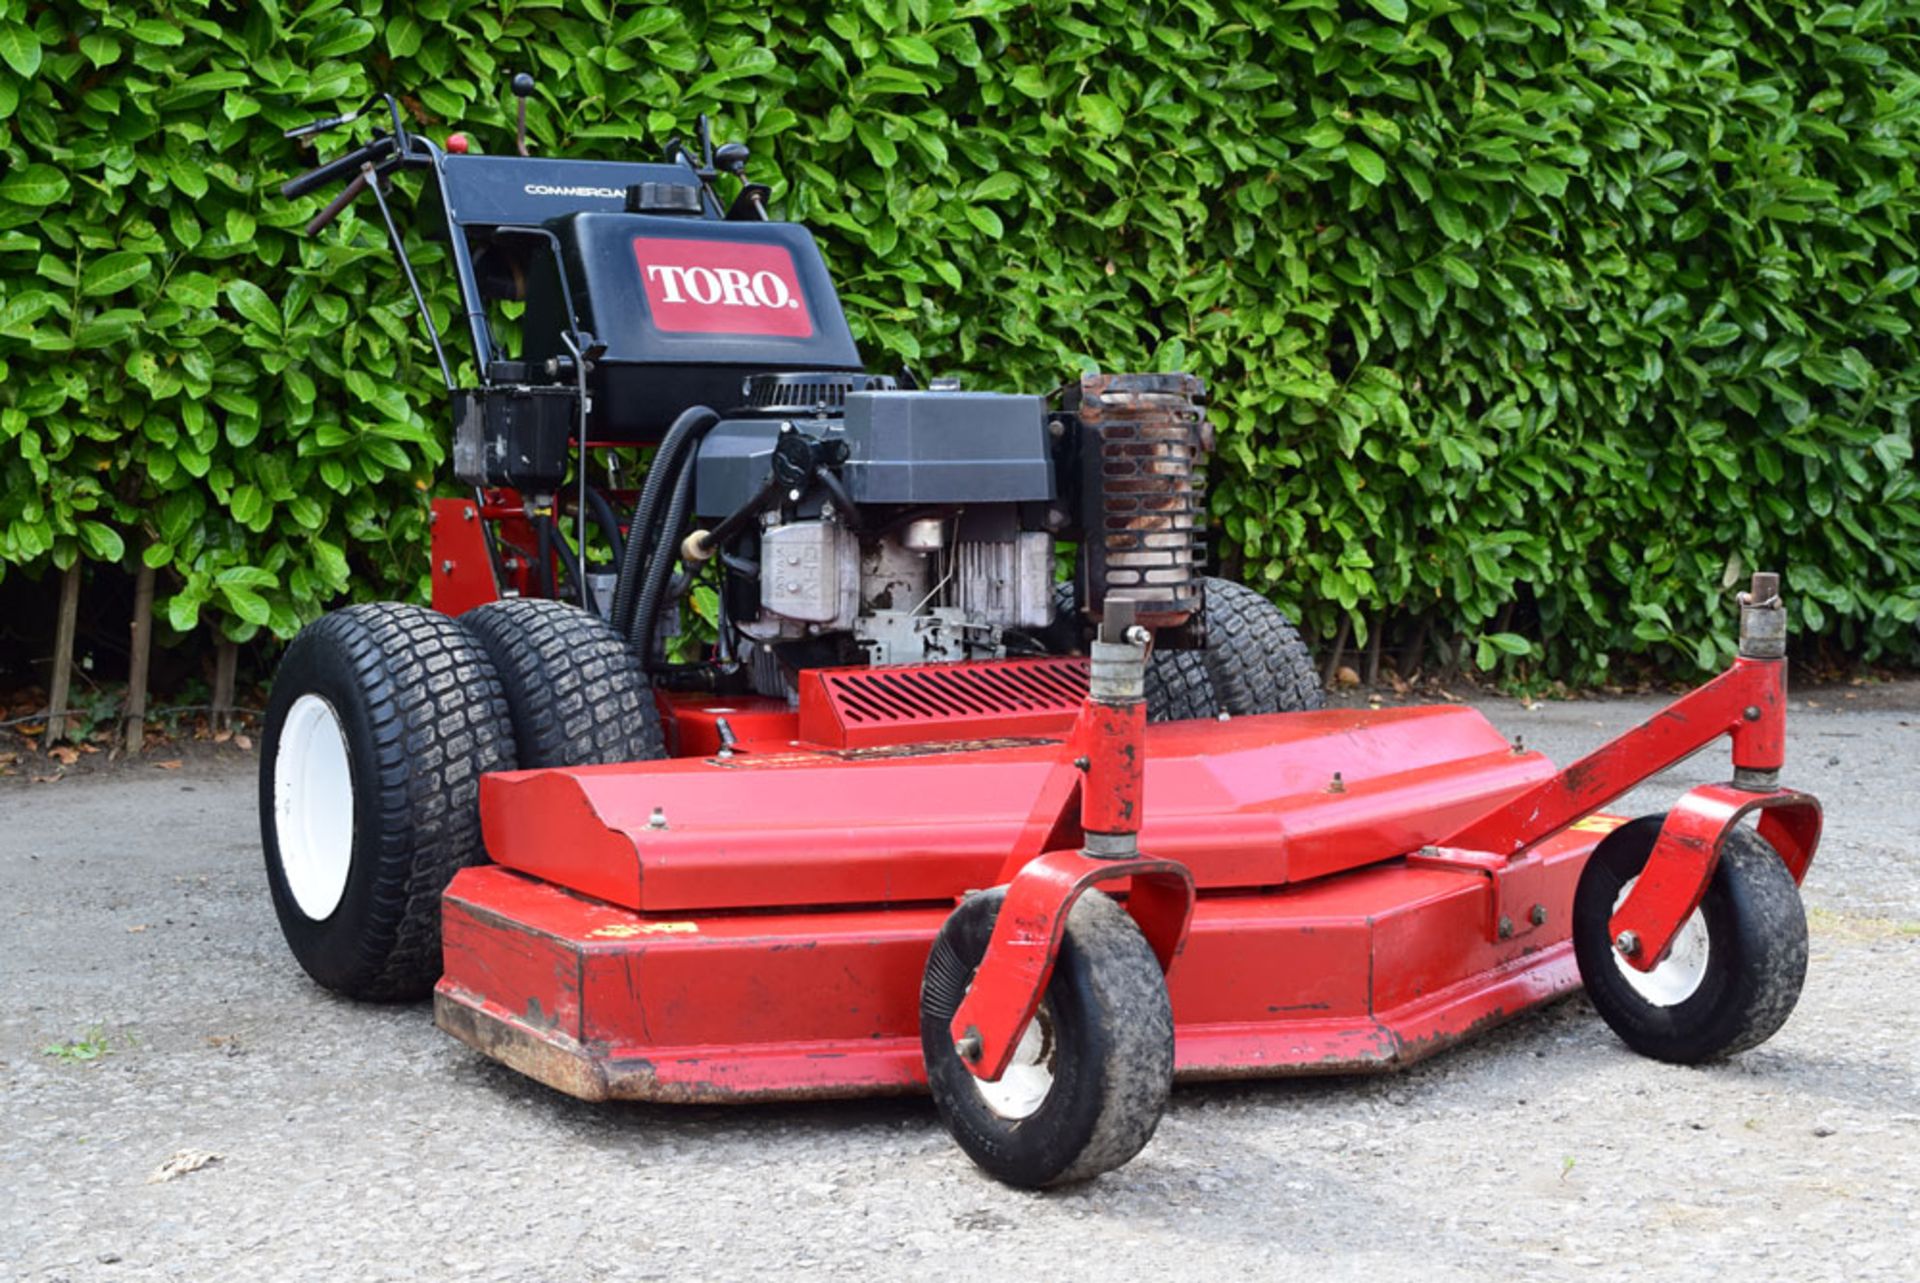 2009 Toro Commercial Pedestrian 48" Commercial Walk Behind Zero Turn Rotary Mower - Image 3 of 7